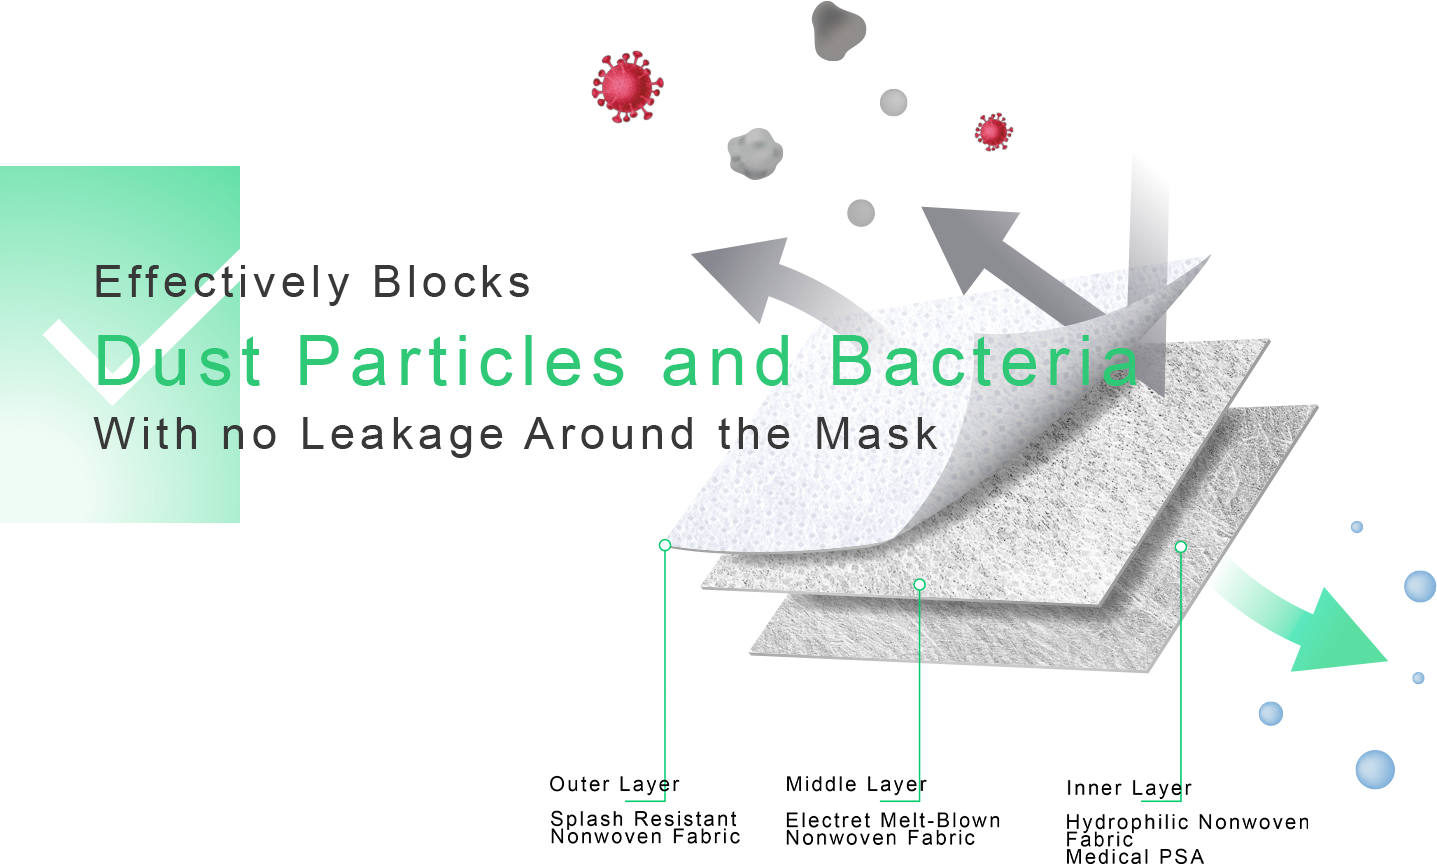 Effectively Blocks
                Dust Particles and Bacteria
                Without Leakage Around the Mask